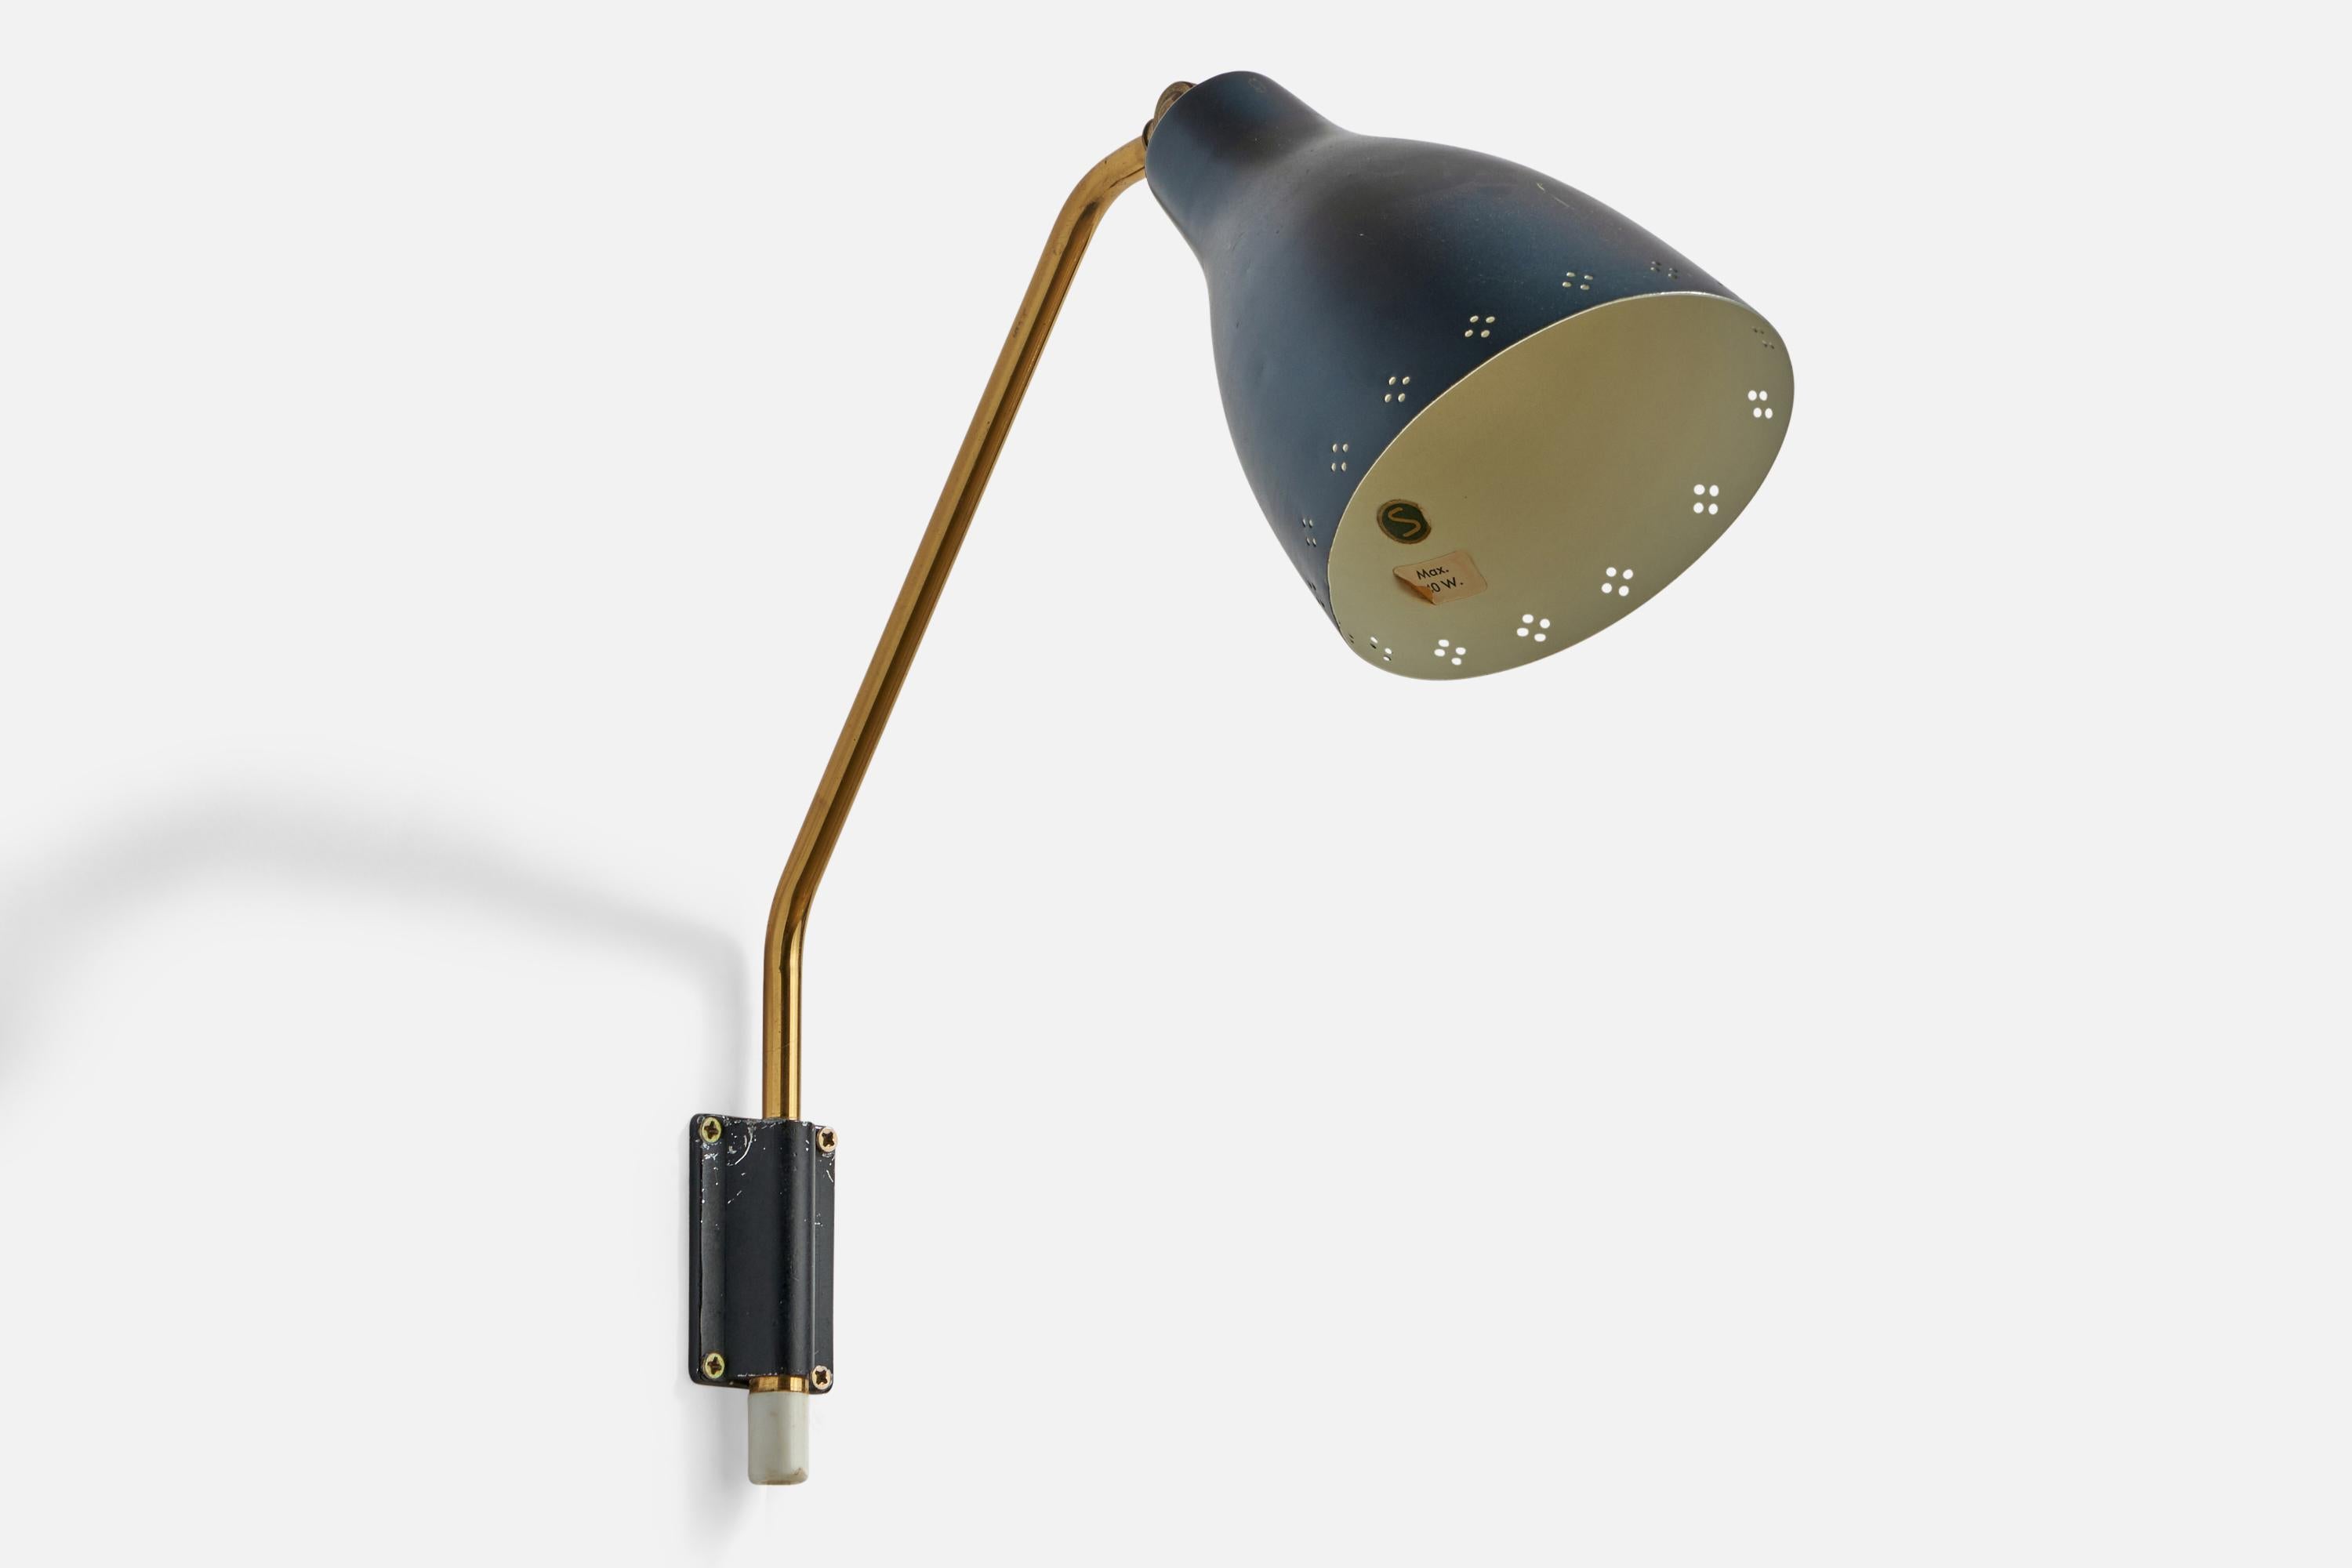 An adjustable brass and blue-lacquered metal wall light designed and produced in Sweden, 1940s.

Overall Dimensions (inches): 13.75” H x 4.75” W x 11.5” D
Back Plate Dimensions (inches): 2.5” H x 1.55” W x 0.2” D
Bulb Specifications: E-26